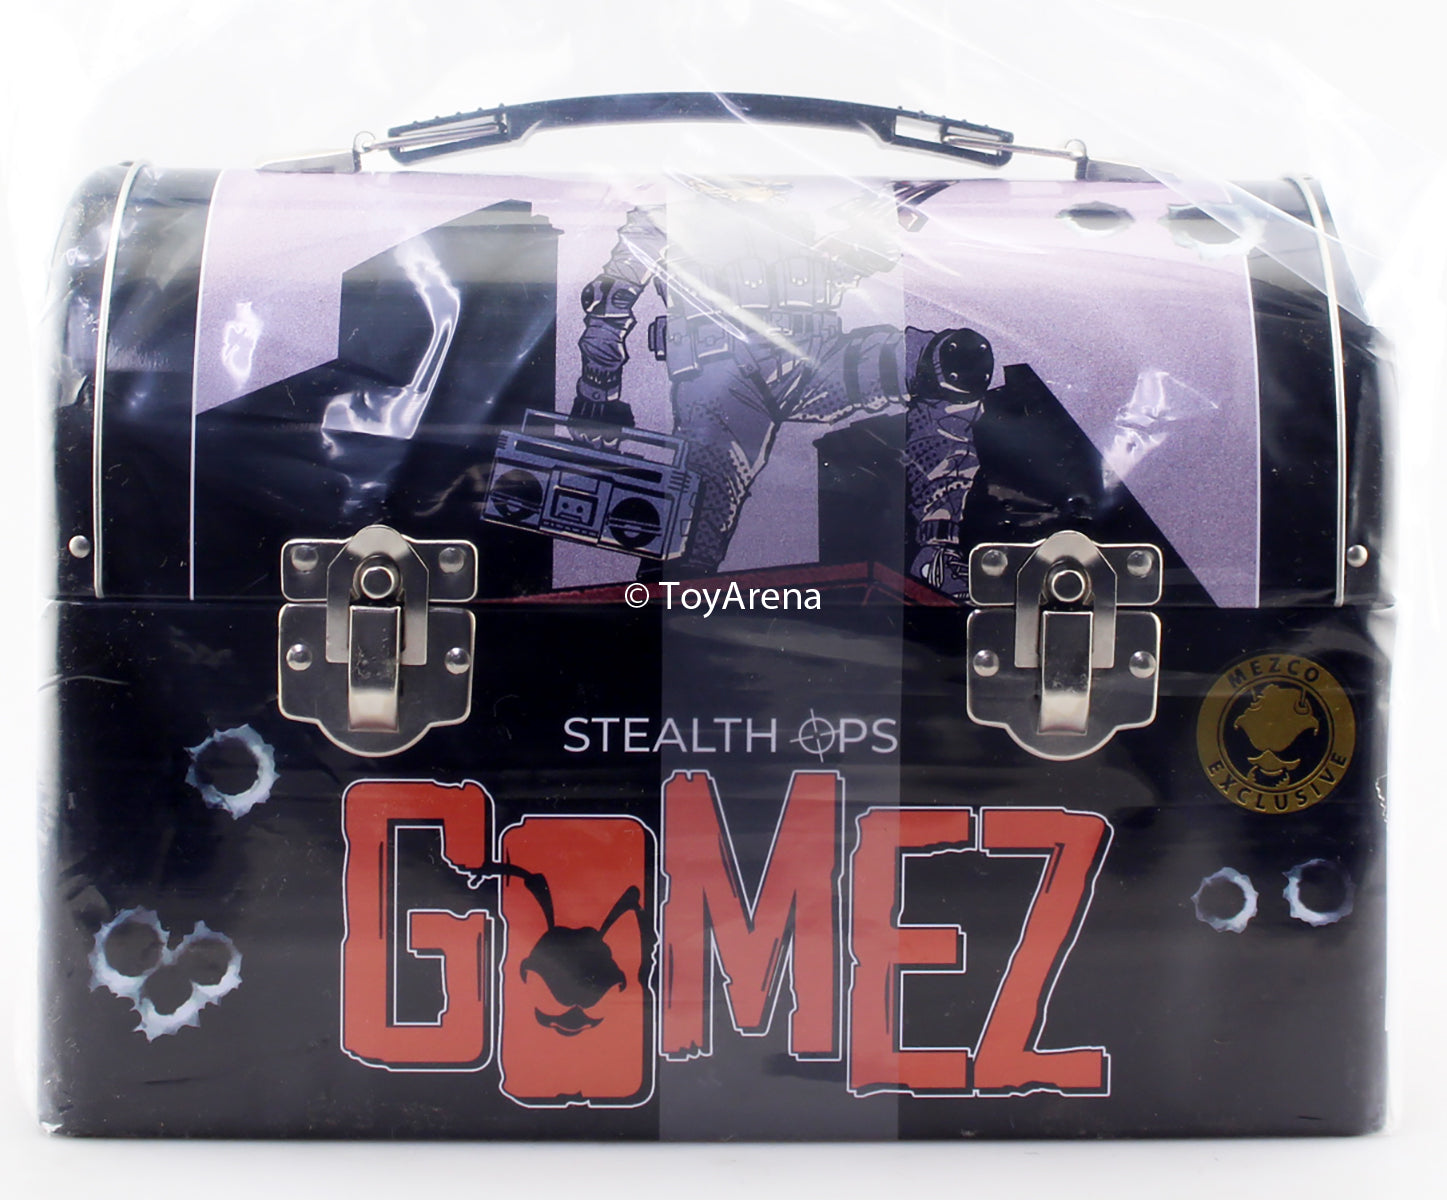 Mezco Toyz ONE:12 Gomez Stealth Ops Edition Action Figure